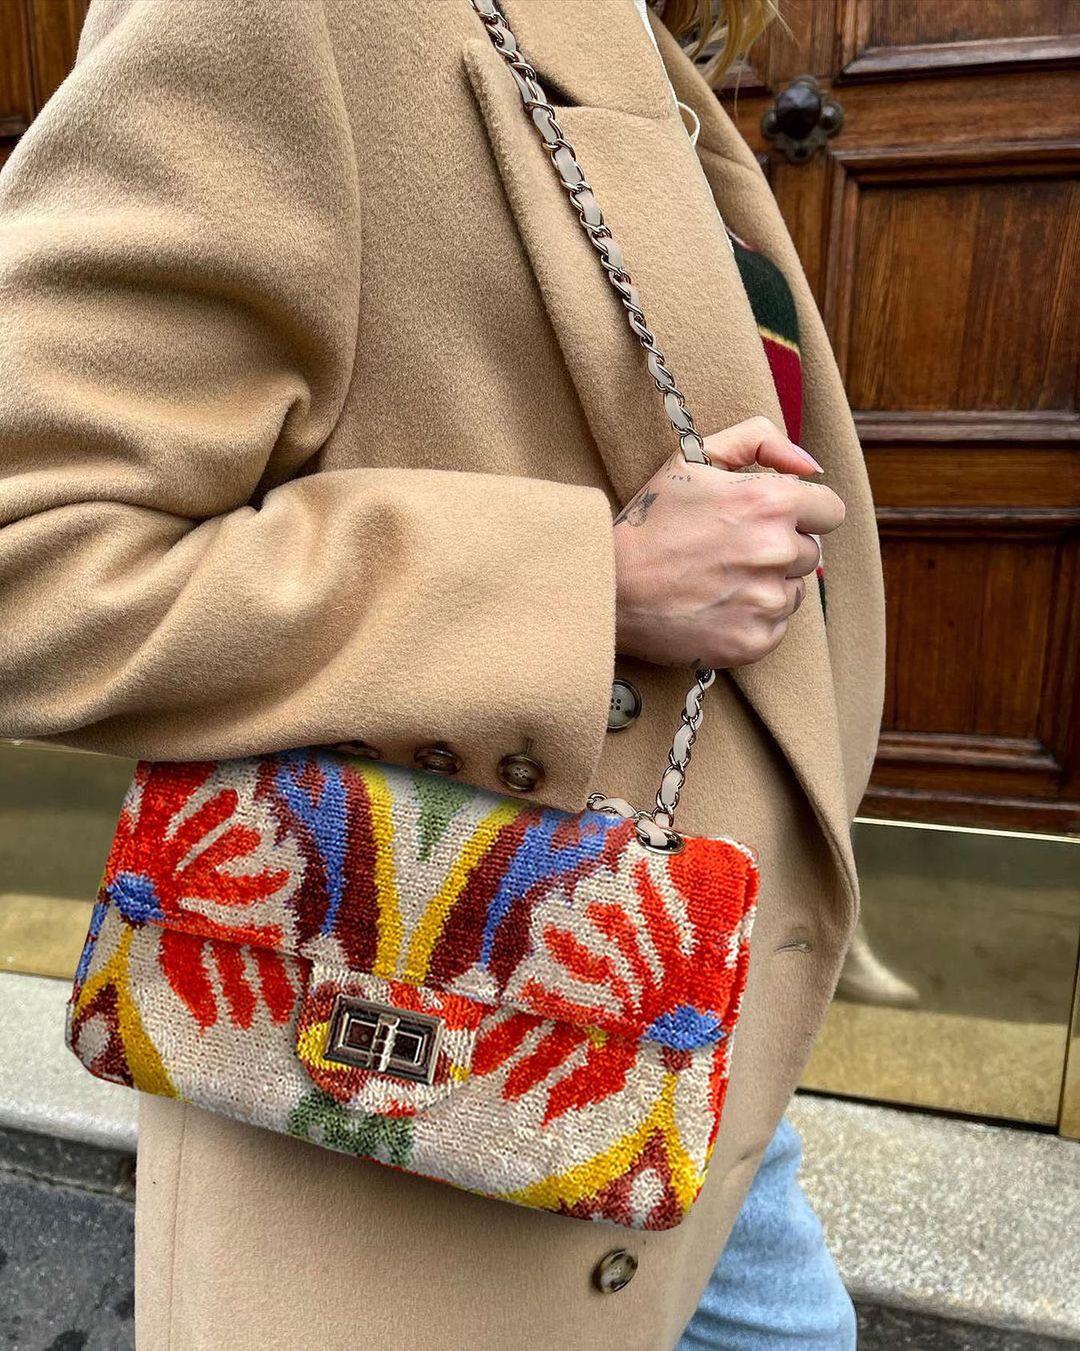 This Turkish brand has the most beautiful embroidered bags that you will not stop seeing on Instagram